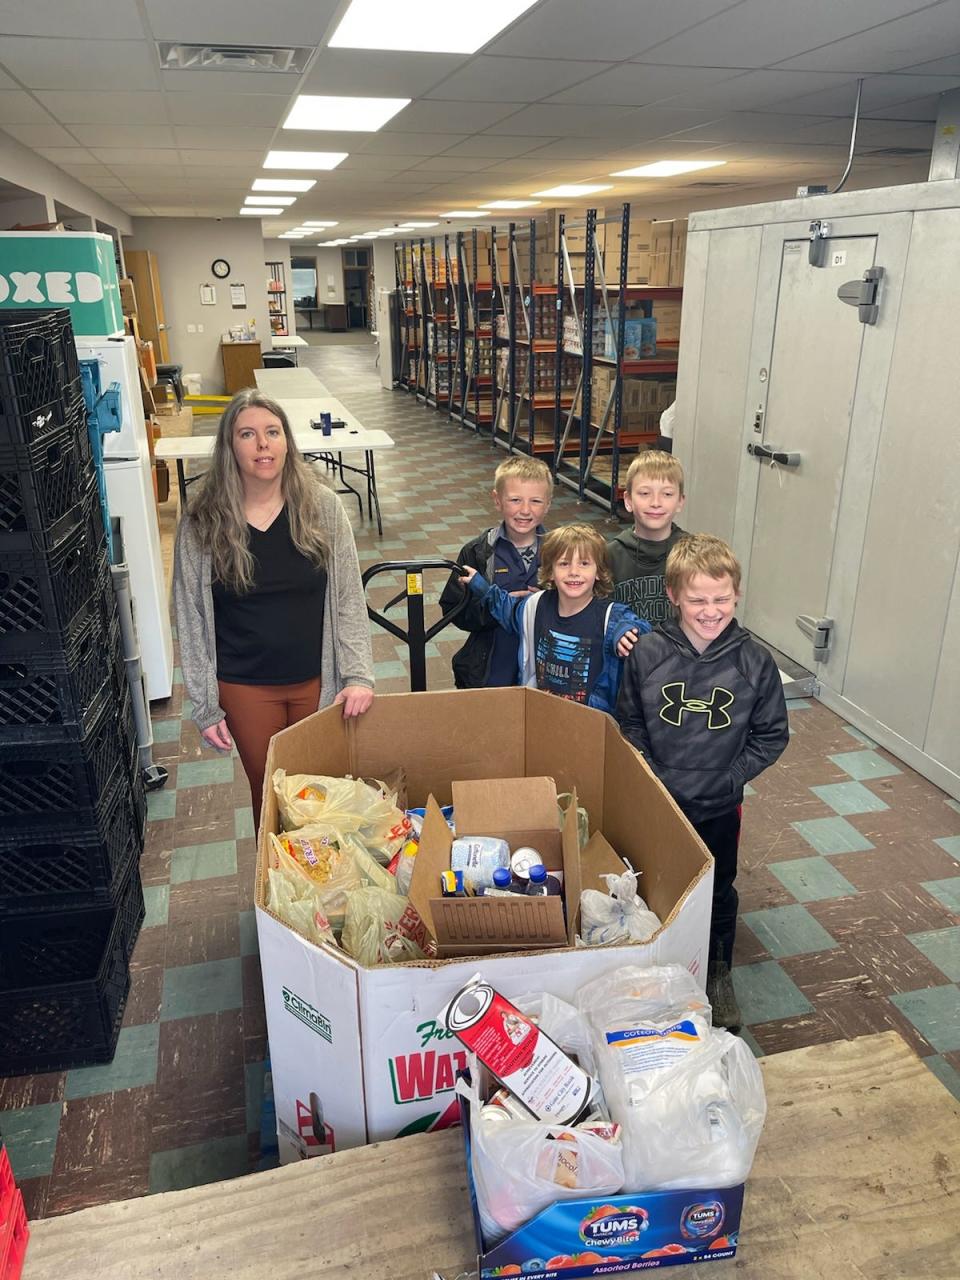 Devils Lake Scouts collected over 1,000 pounds of food for w worthy cause this past week thanks to support from the local community.